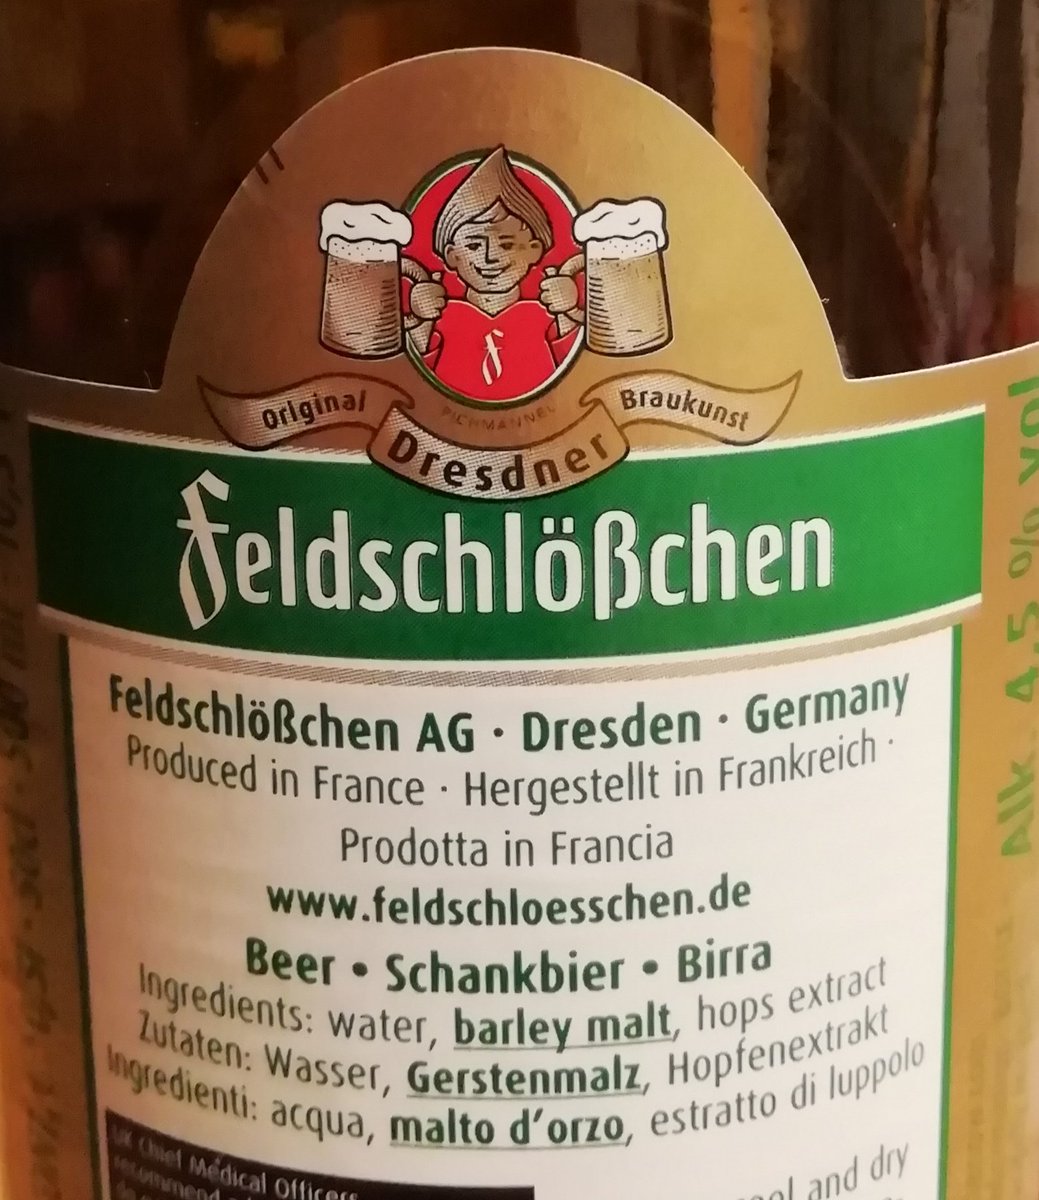 The second surprise is that the German one is really French. Despite proclaiming its Dresdner origins, having a large castle-es que brewery in Germany, and claiming adherence to the Reinheitsgebot, it's brewed somewhere in France. Go figure. No surprise that it tastes meh.